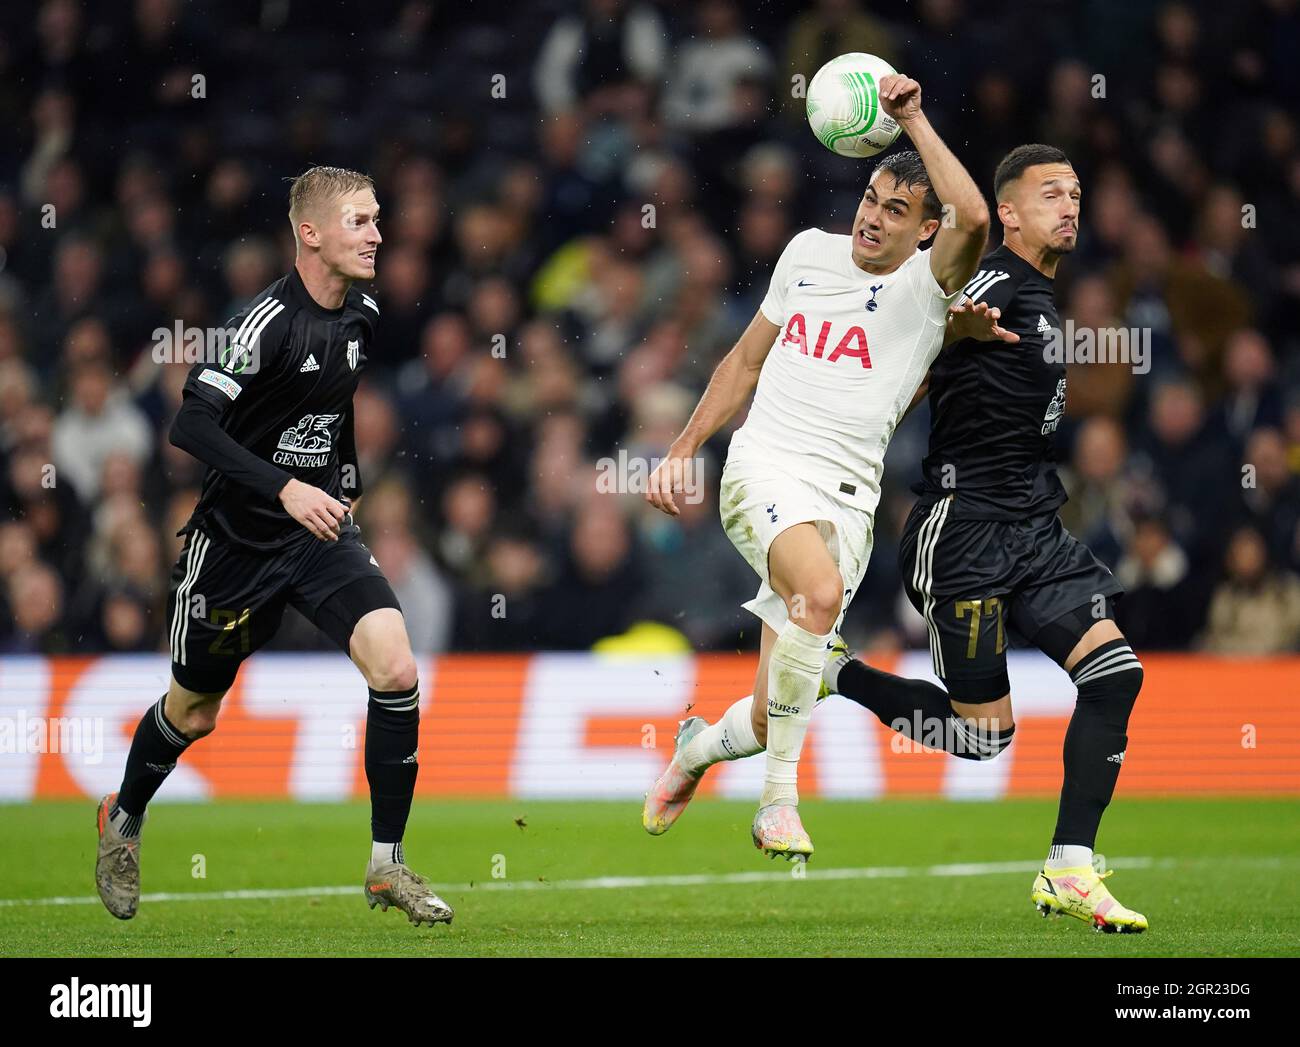 NS Mura's Zan Karnicnik, Tottenham Hotspur's Giovani Lo Celso, and NS Mura's Stanisa Mandic (left-right) battle for the ball during the UEFA Europa Conference League Group G match at the Tottenham Hotspur Stadium, London. Picture date: Thursday September 30, 2021. Stock Photo